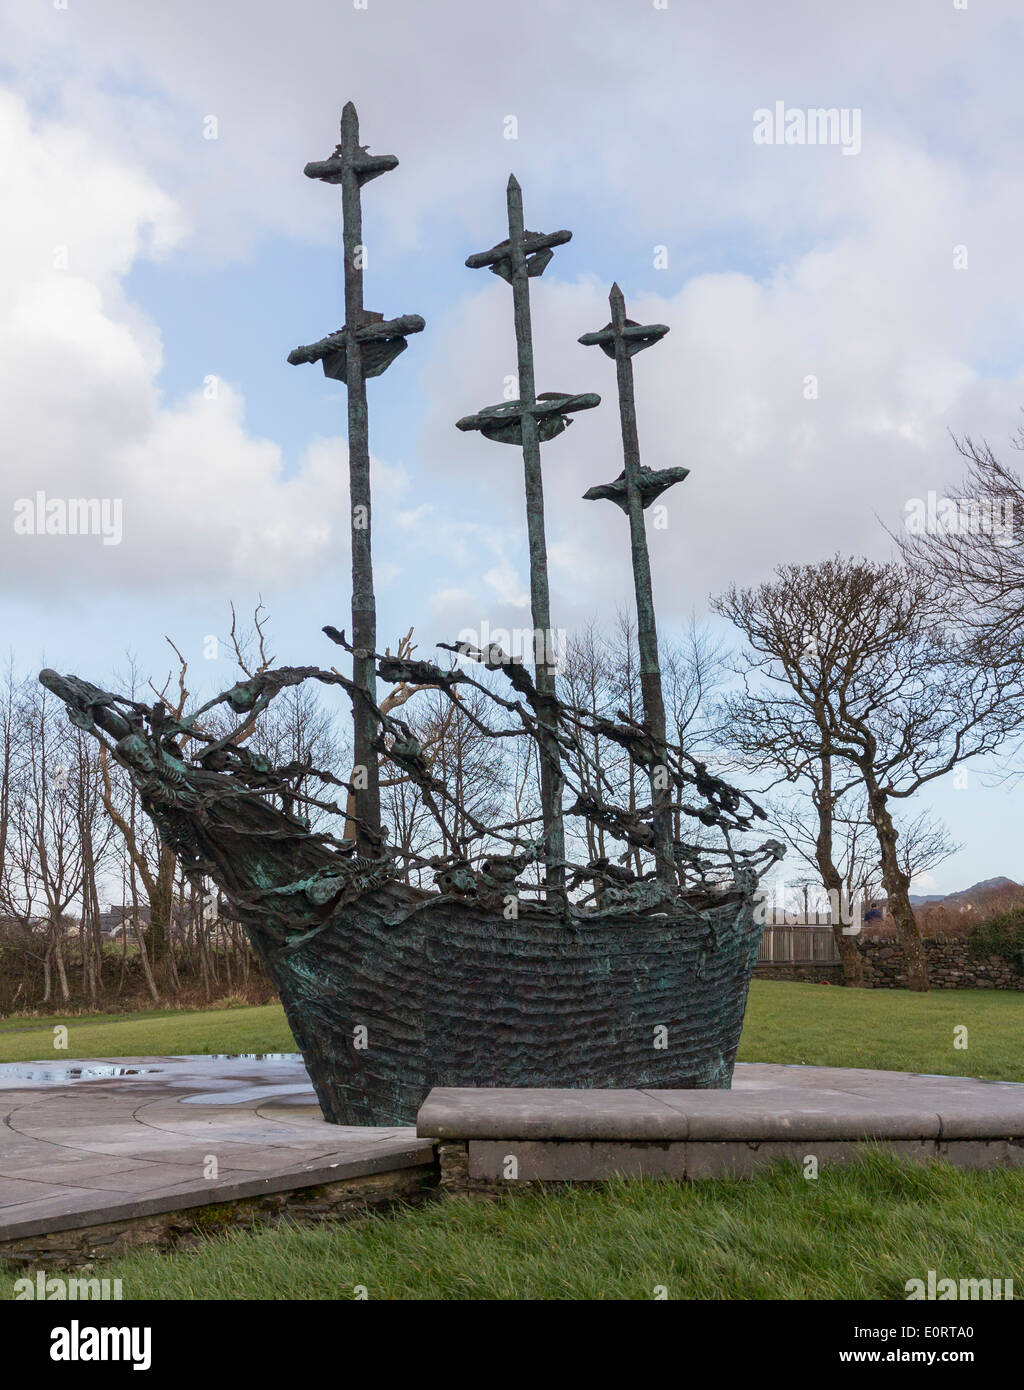 Coffin ship sculpture in Murrisk, County Mayo, Republic of Ireland to commemorate Great Famine in Eire and emigration to USA Stock Photo